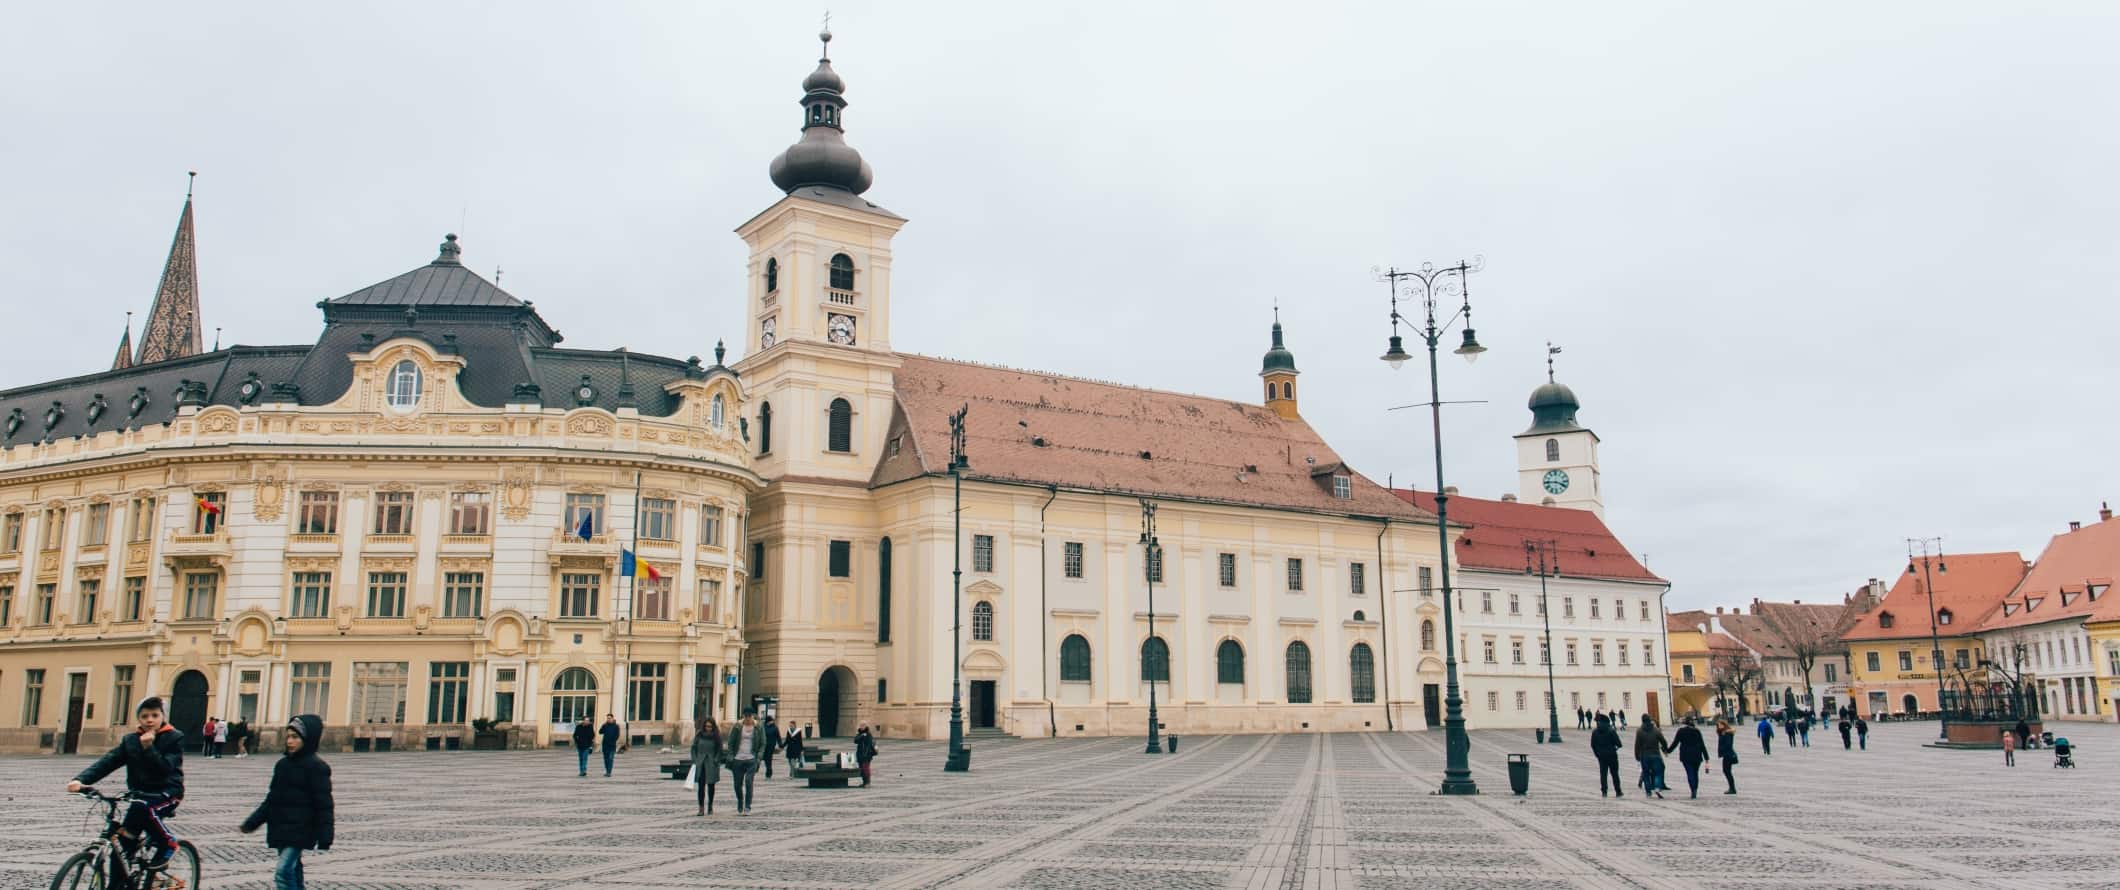 People walking through a square in the historic Old Town in Sibiu, Romania